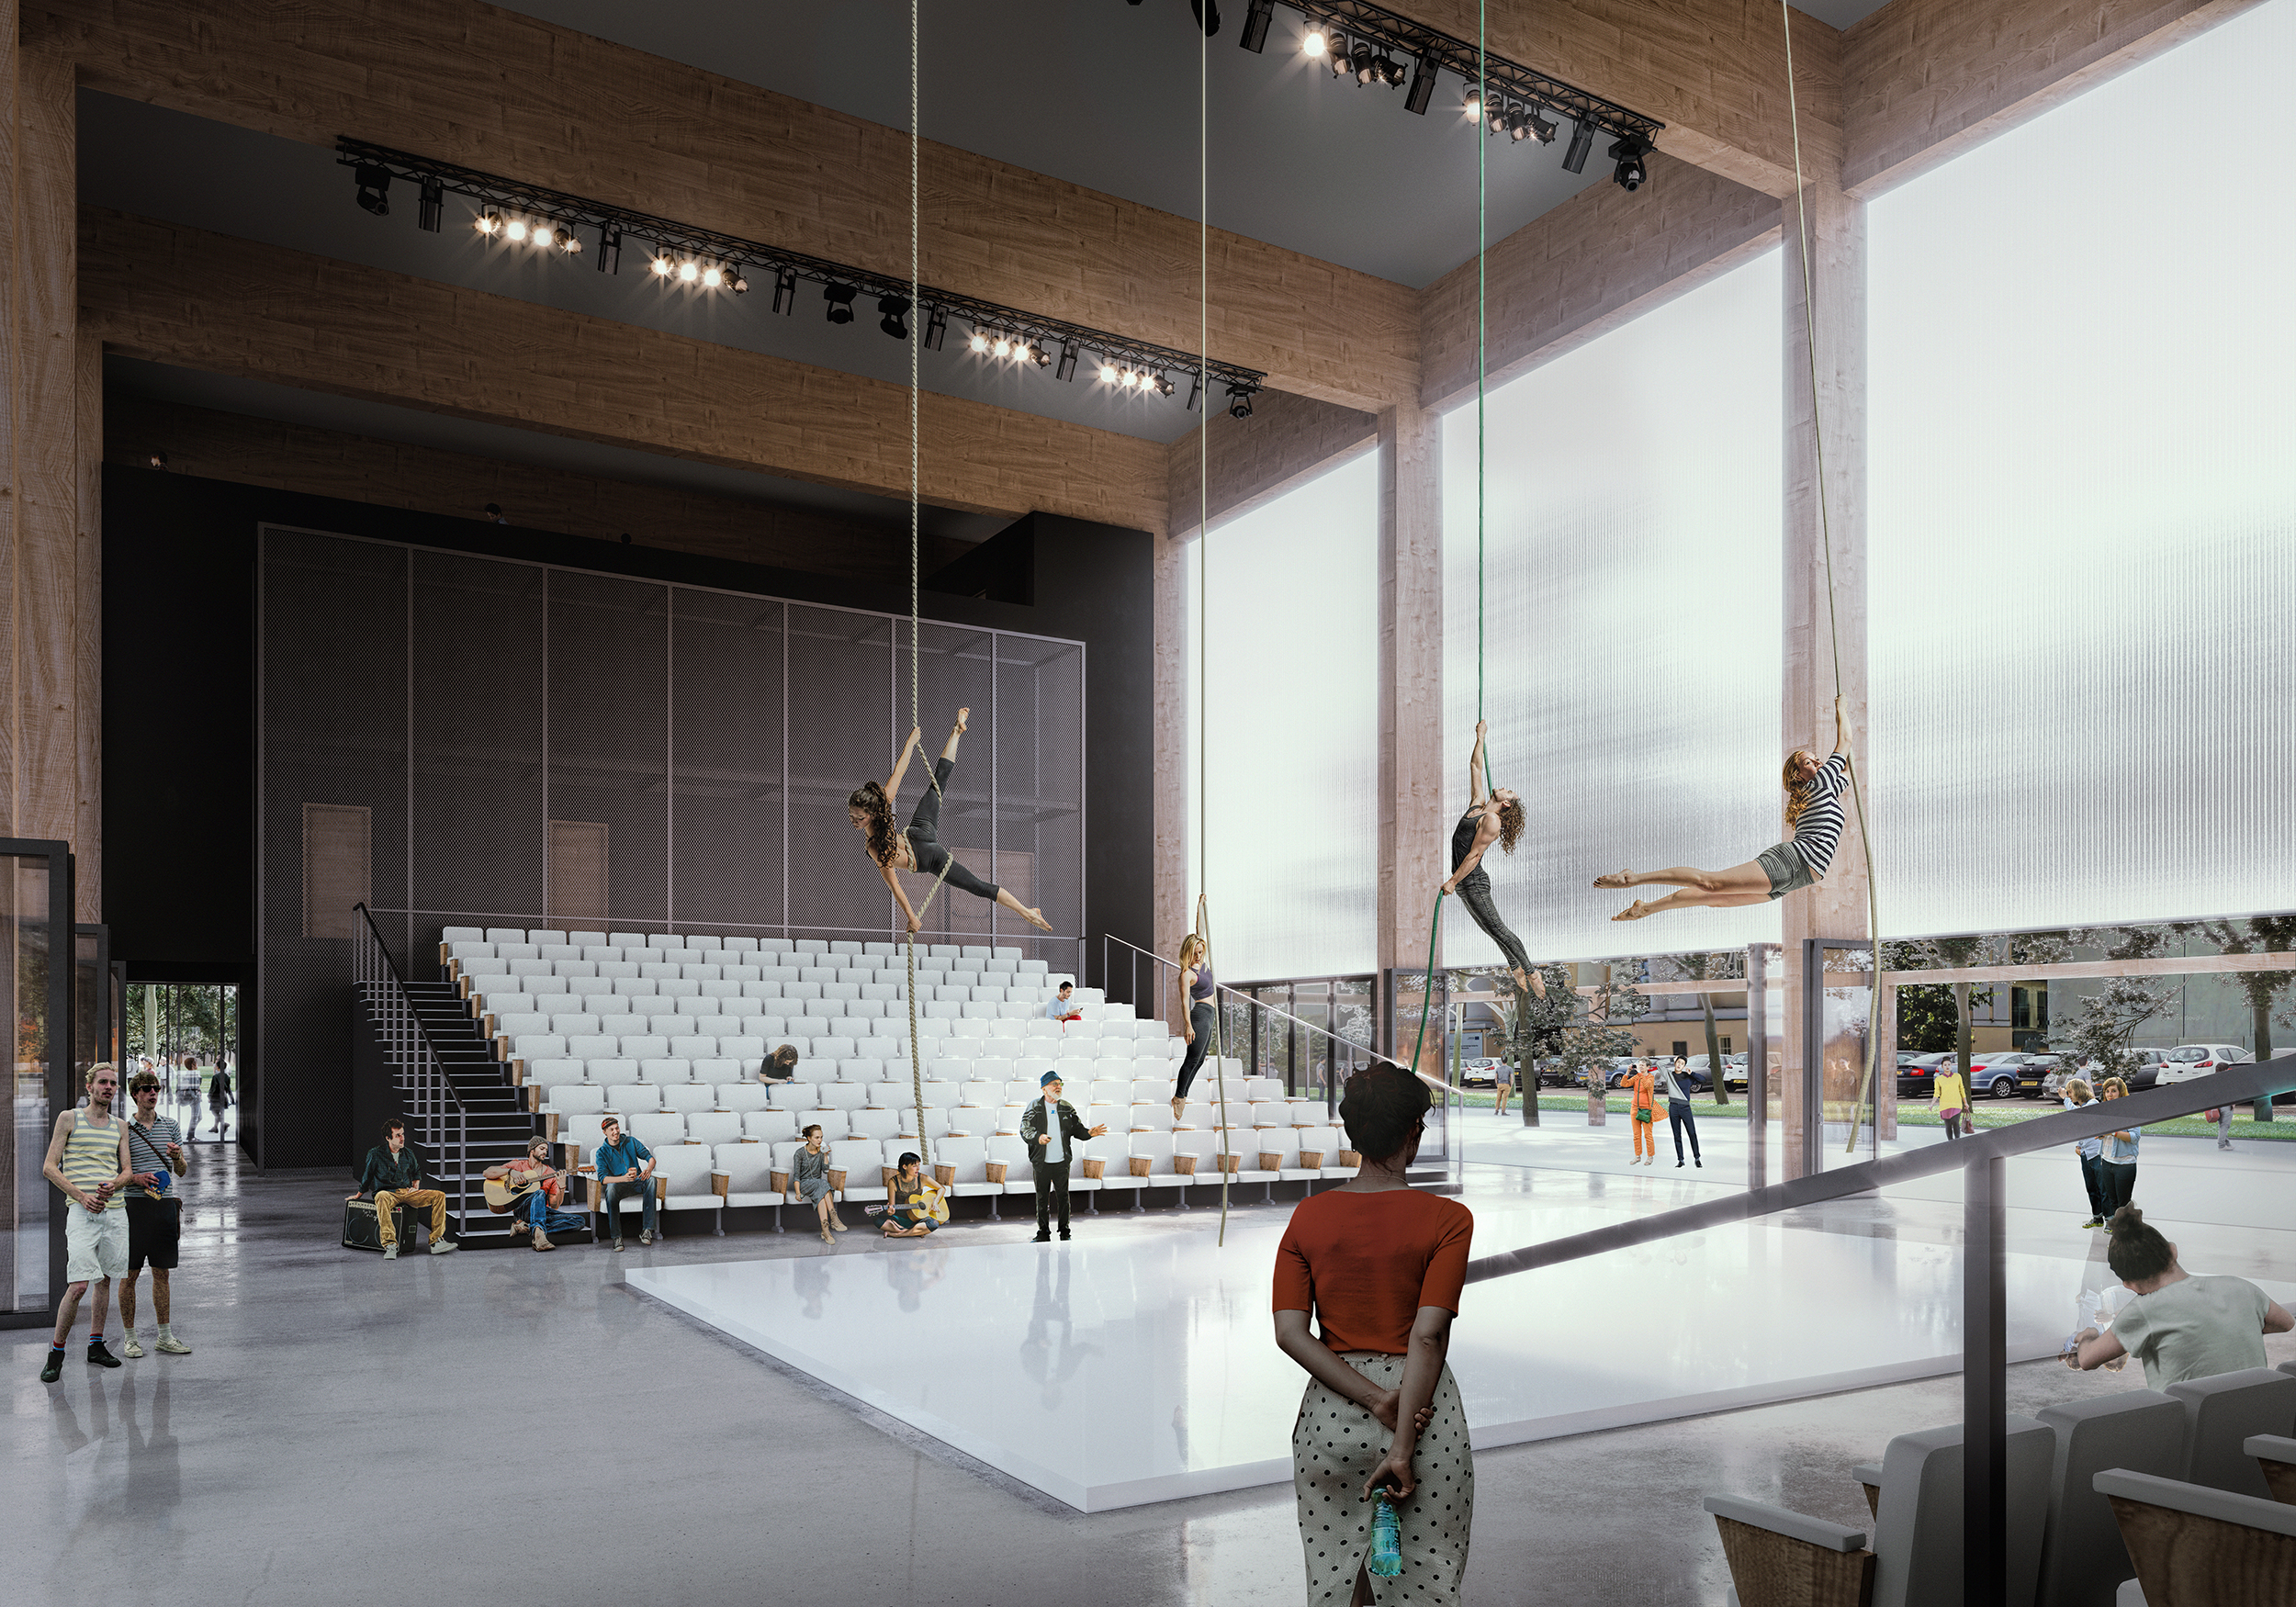 “Cultural Centre Wa-Wa Renderings” by ELEMENT VISUALIZATIONS